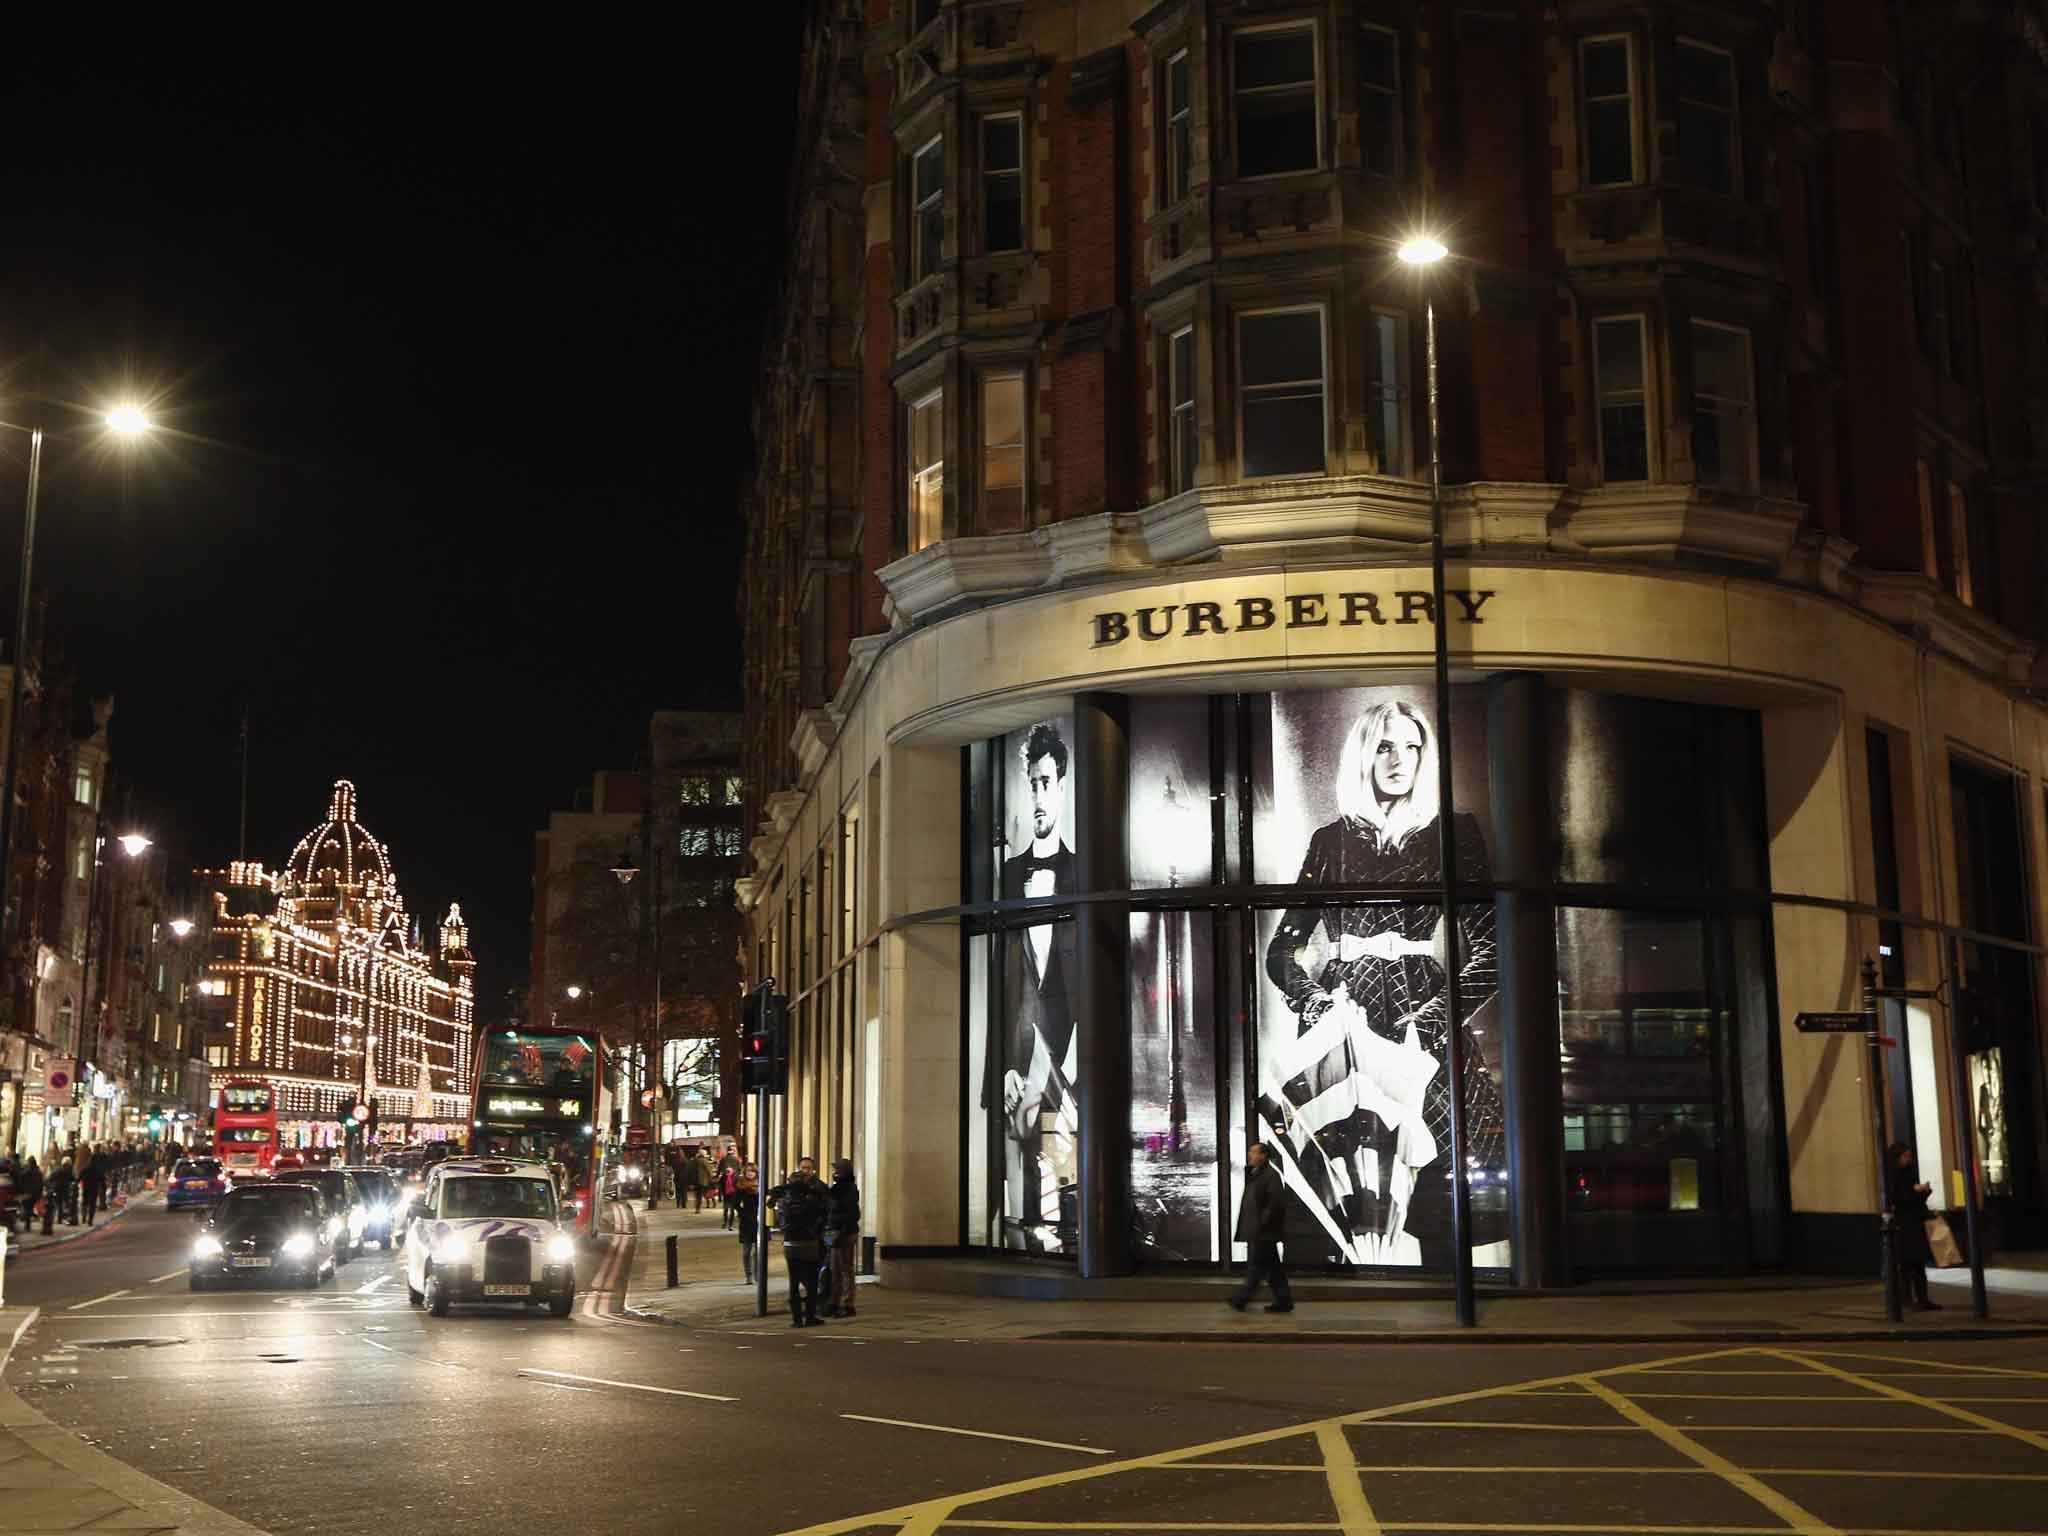 Burberry makes most of its sales overseas